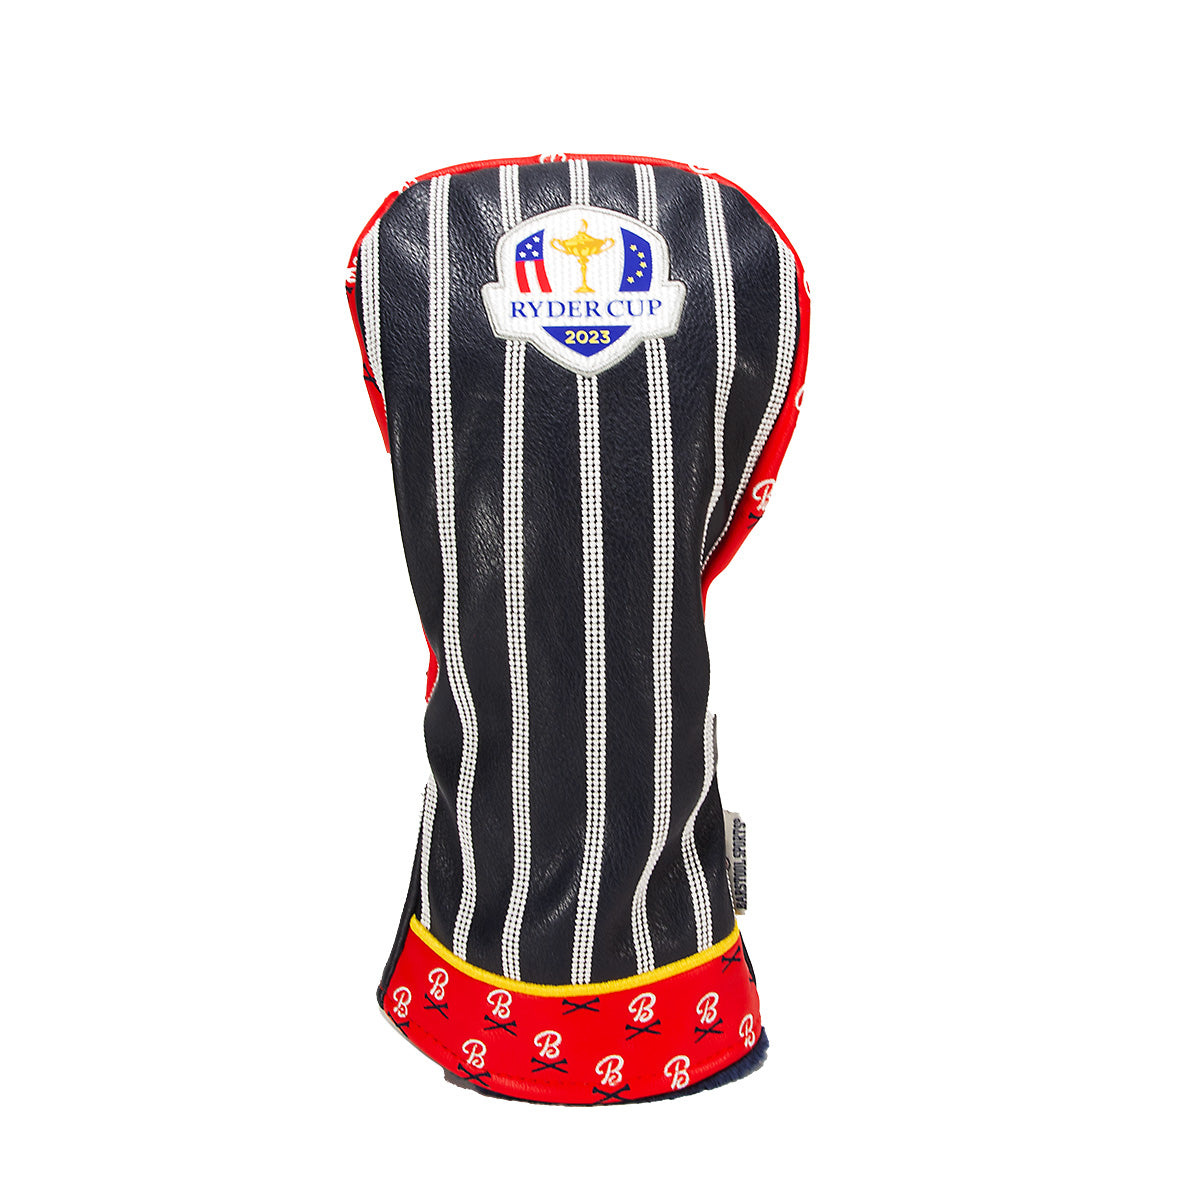 Barstool Golf x Ryder Cup Driver Headcover-Golf Accessories-Fore Play-Navy-One Size-Barstool Sports